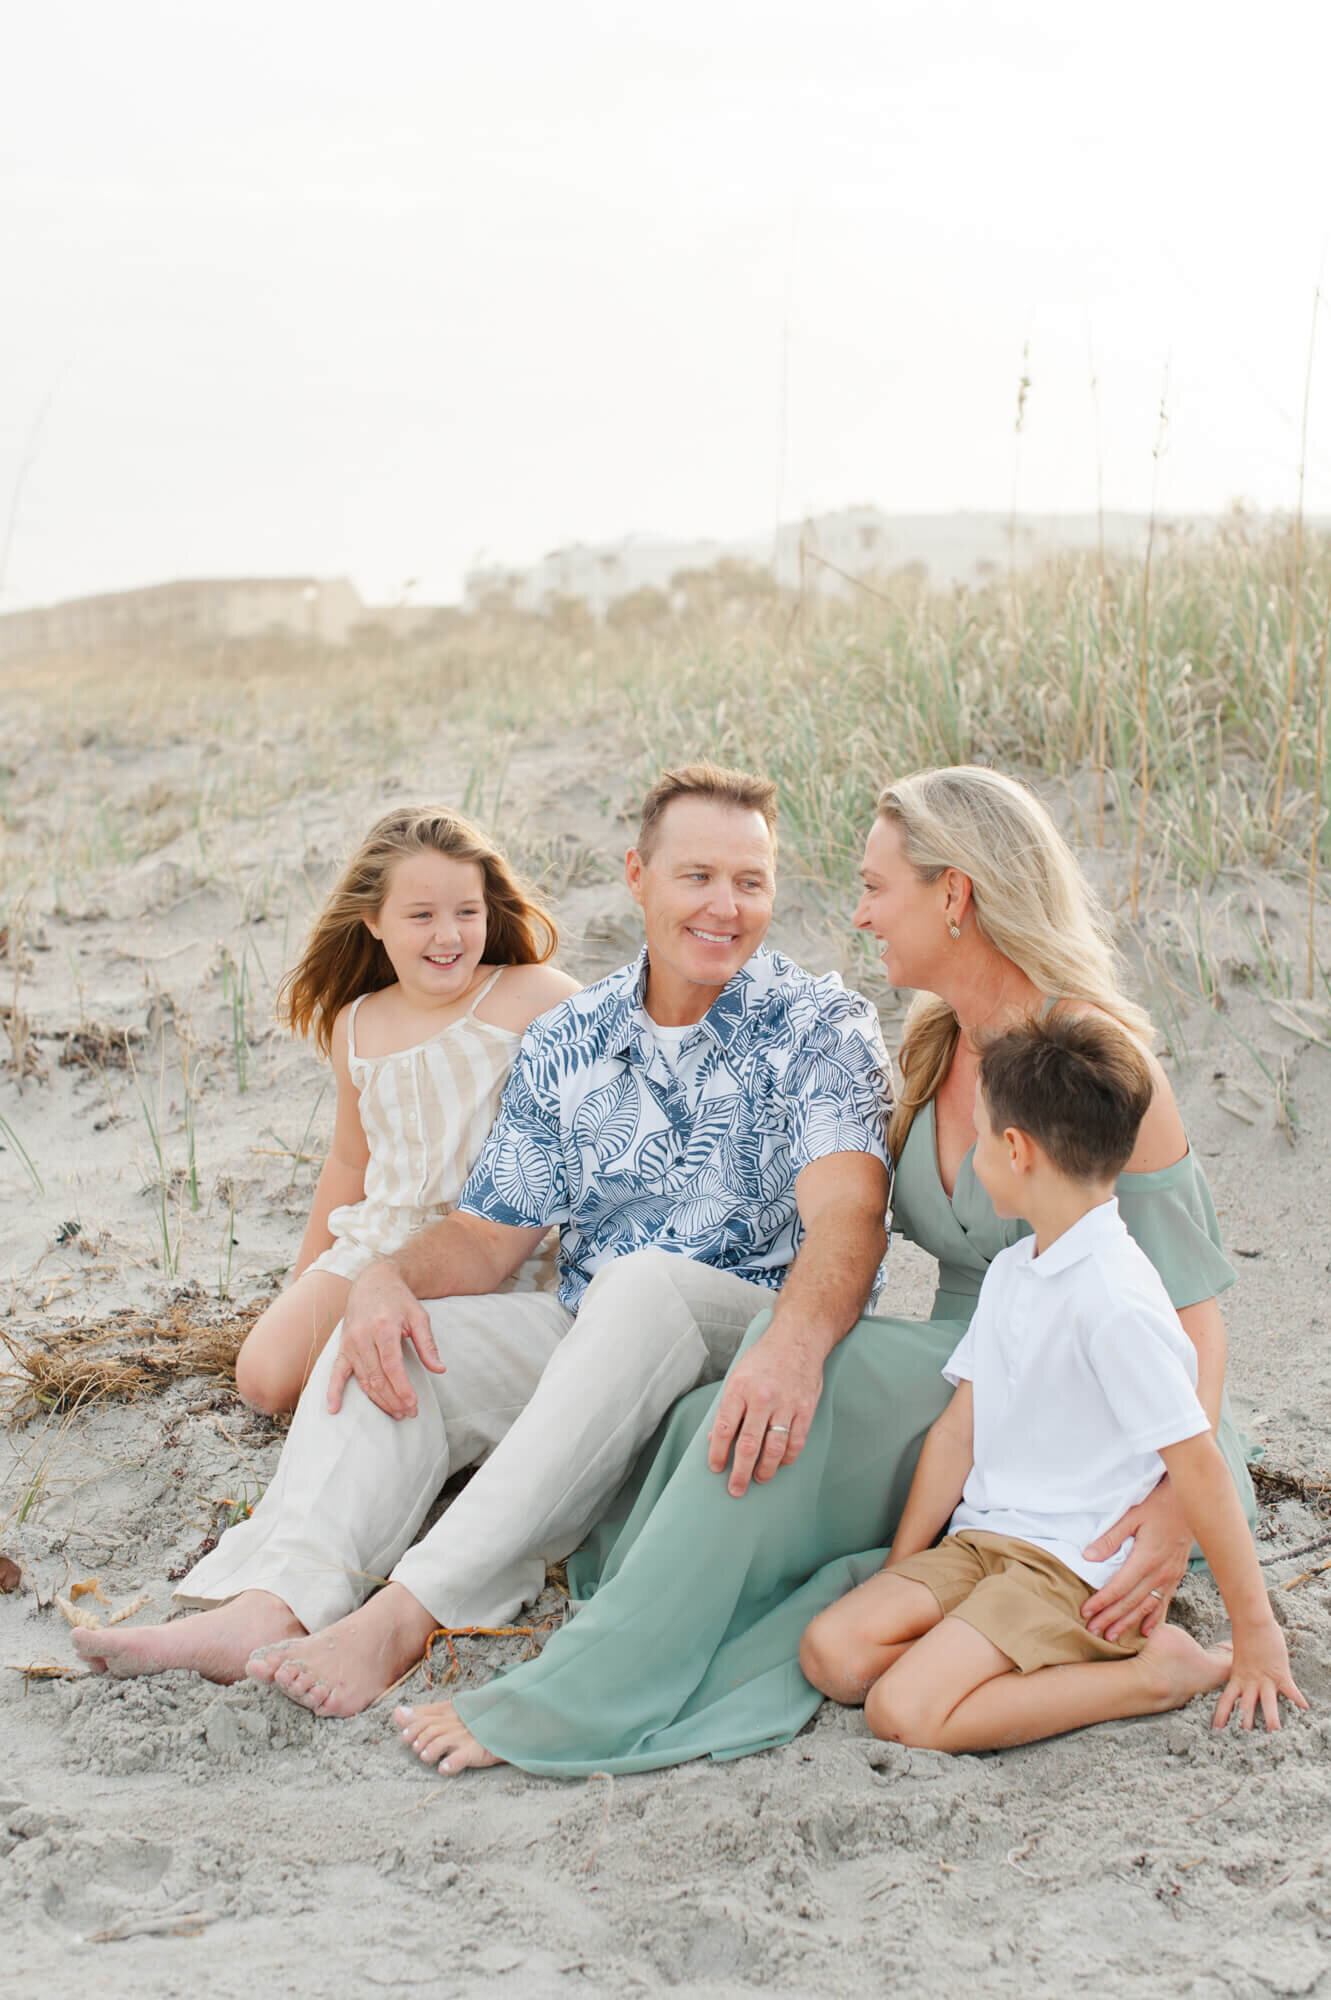 Family sitting near the dunes laughing at each other at sunset